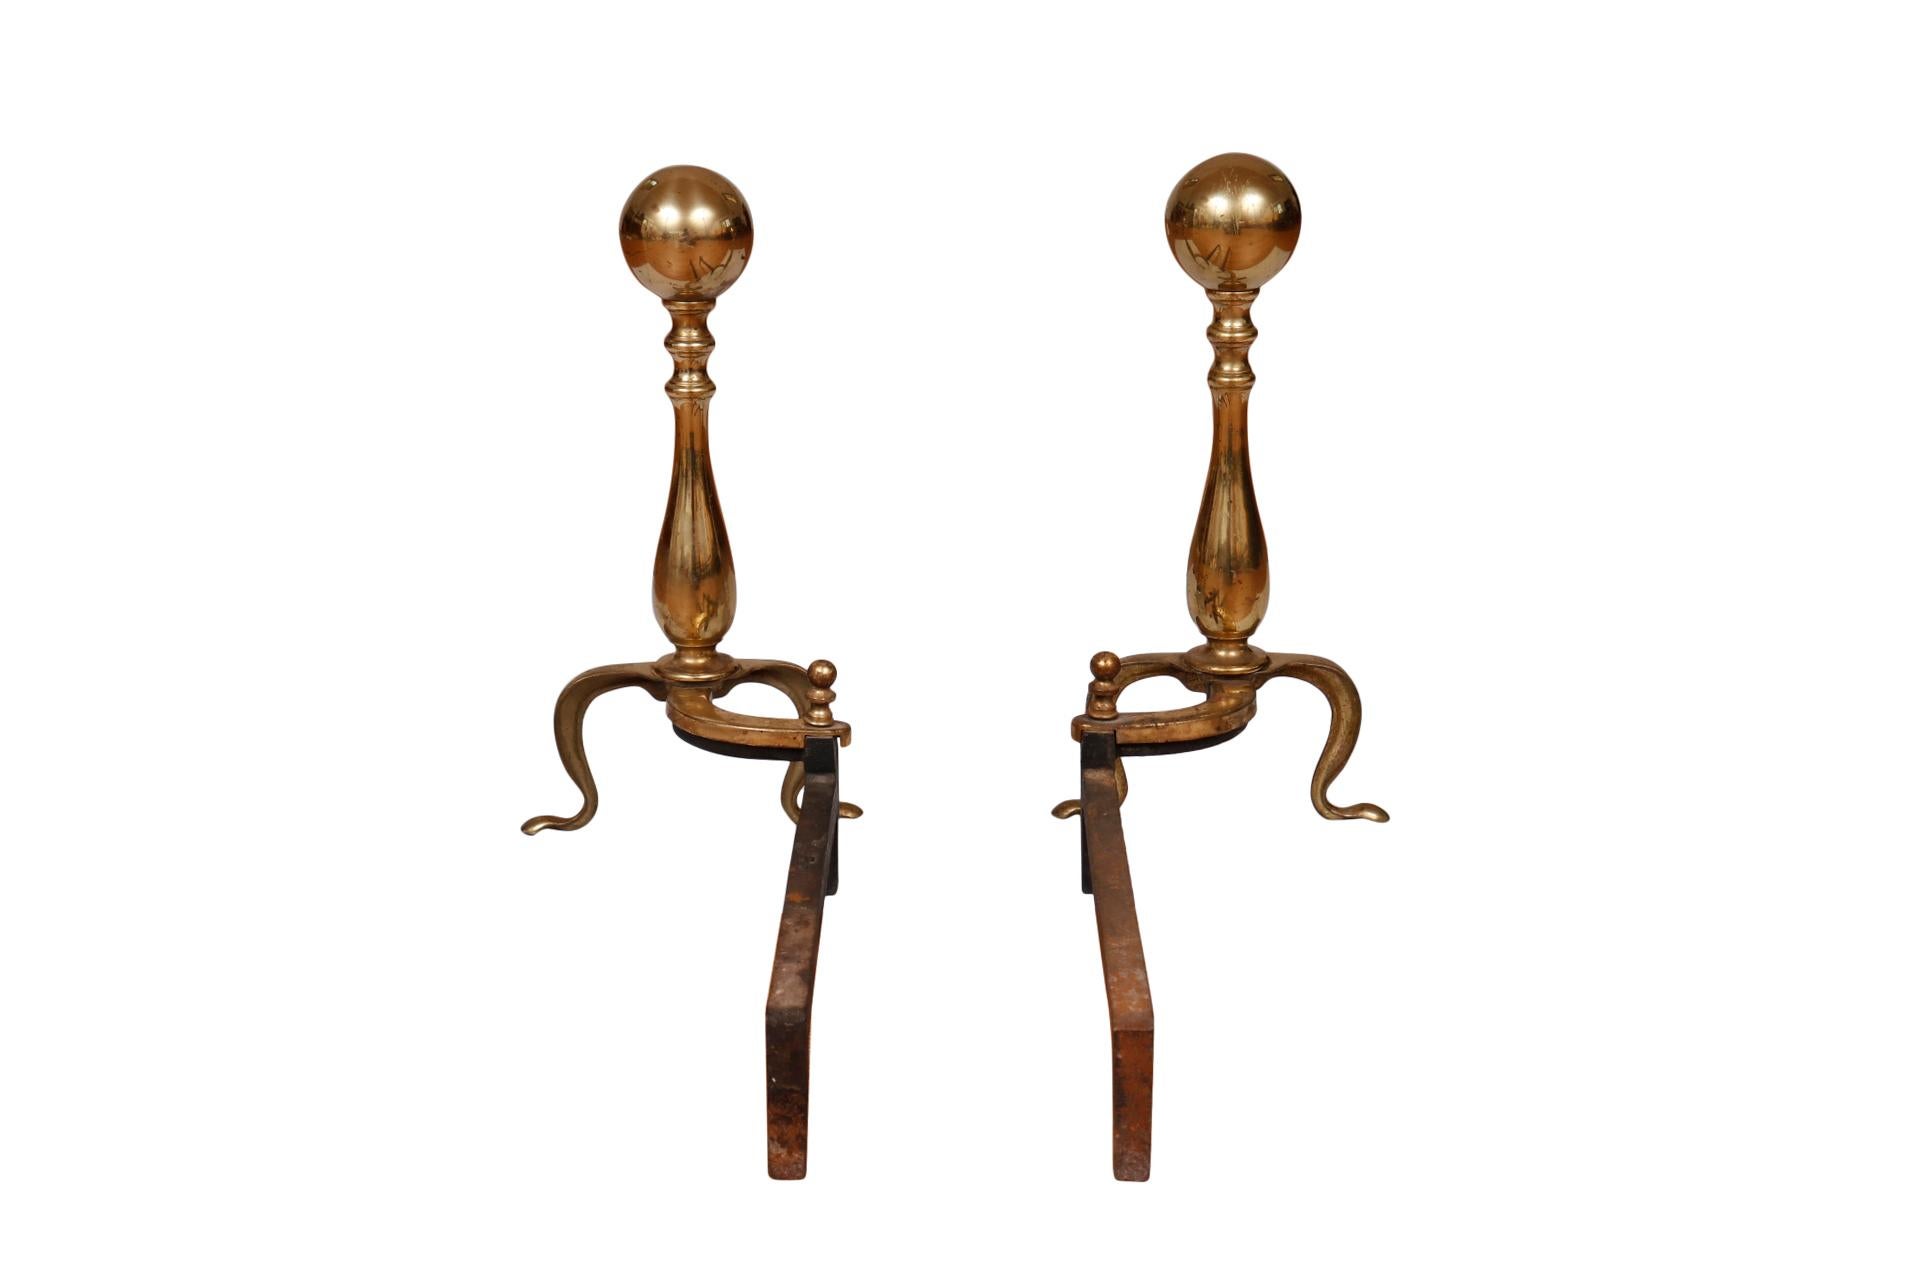 American Puritan Ball Topped Brass Andirons, a Pair